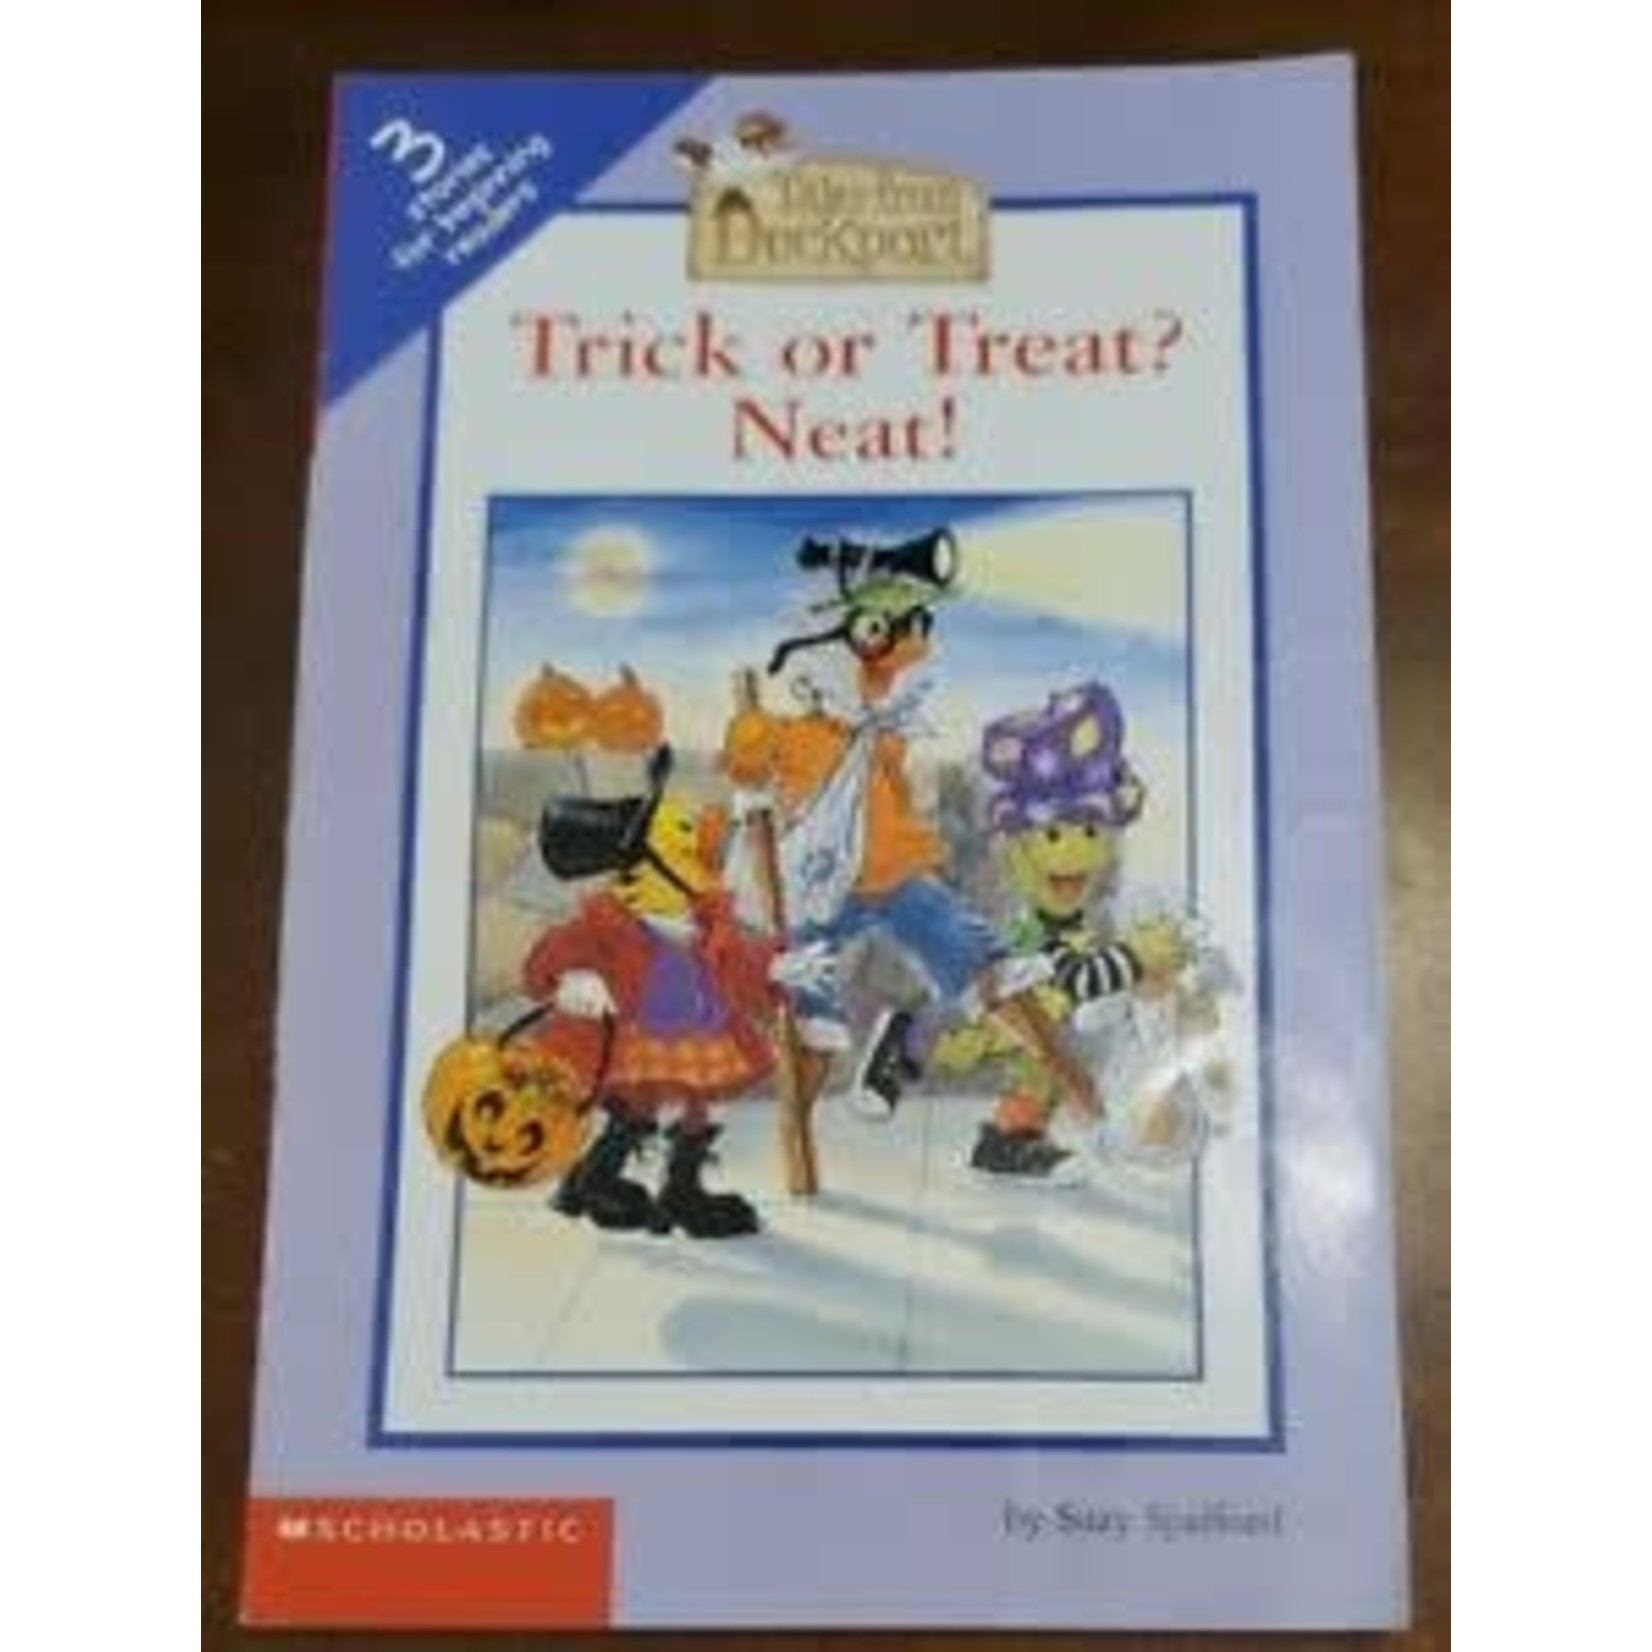 Tales from Duckport - Trick or Treat Neat!